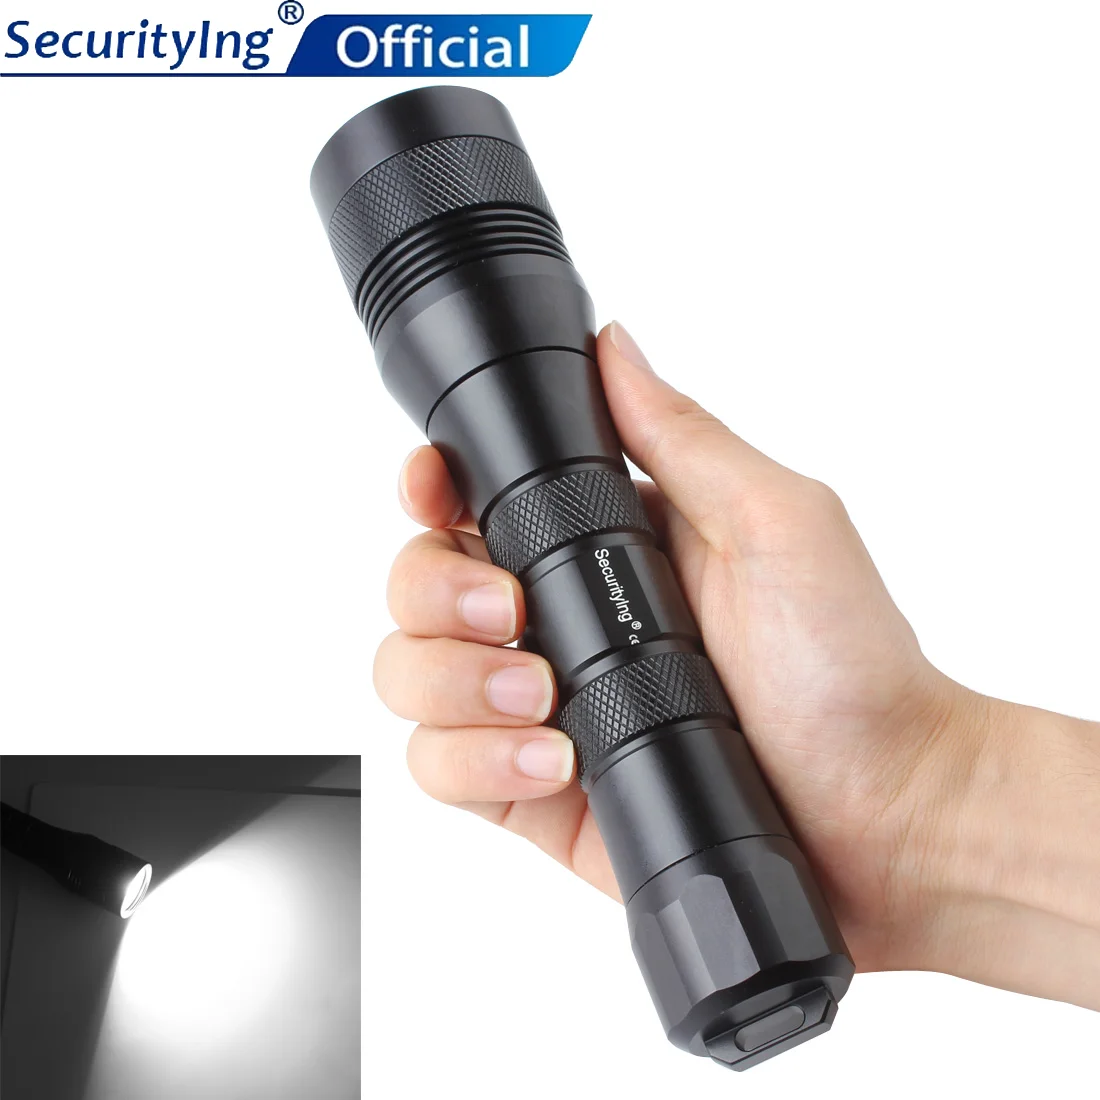 

SecurityIng Diving Flashlight Wide 120 Degrees Beam Angle Scuba light 150M XM-L2 LED Underwater Photography Video Torch 1050Lm